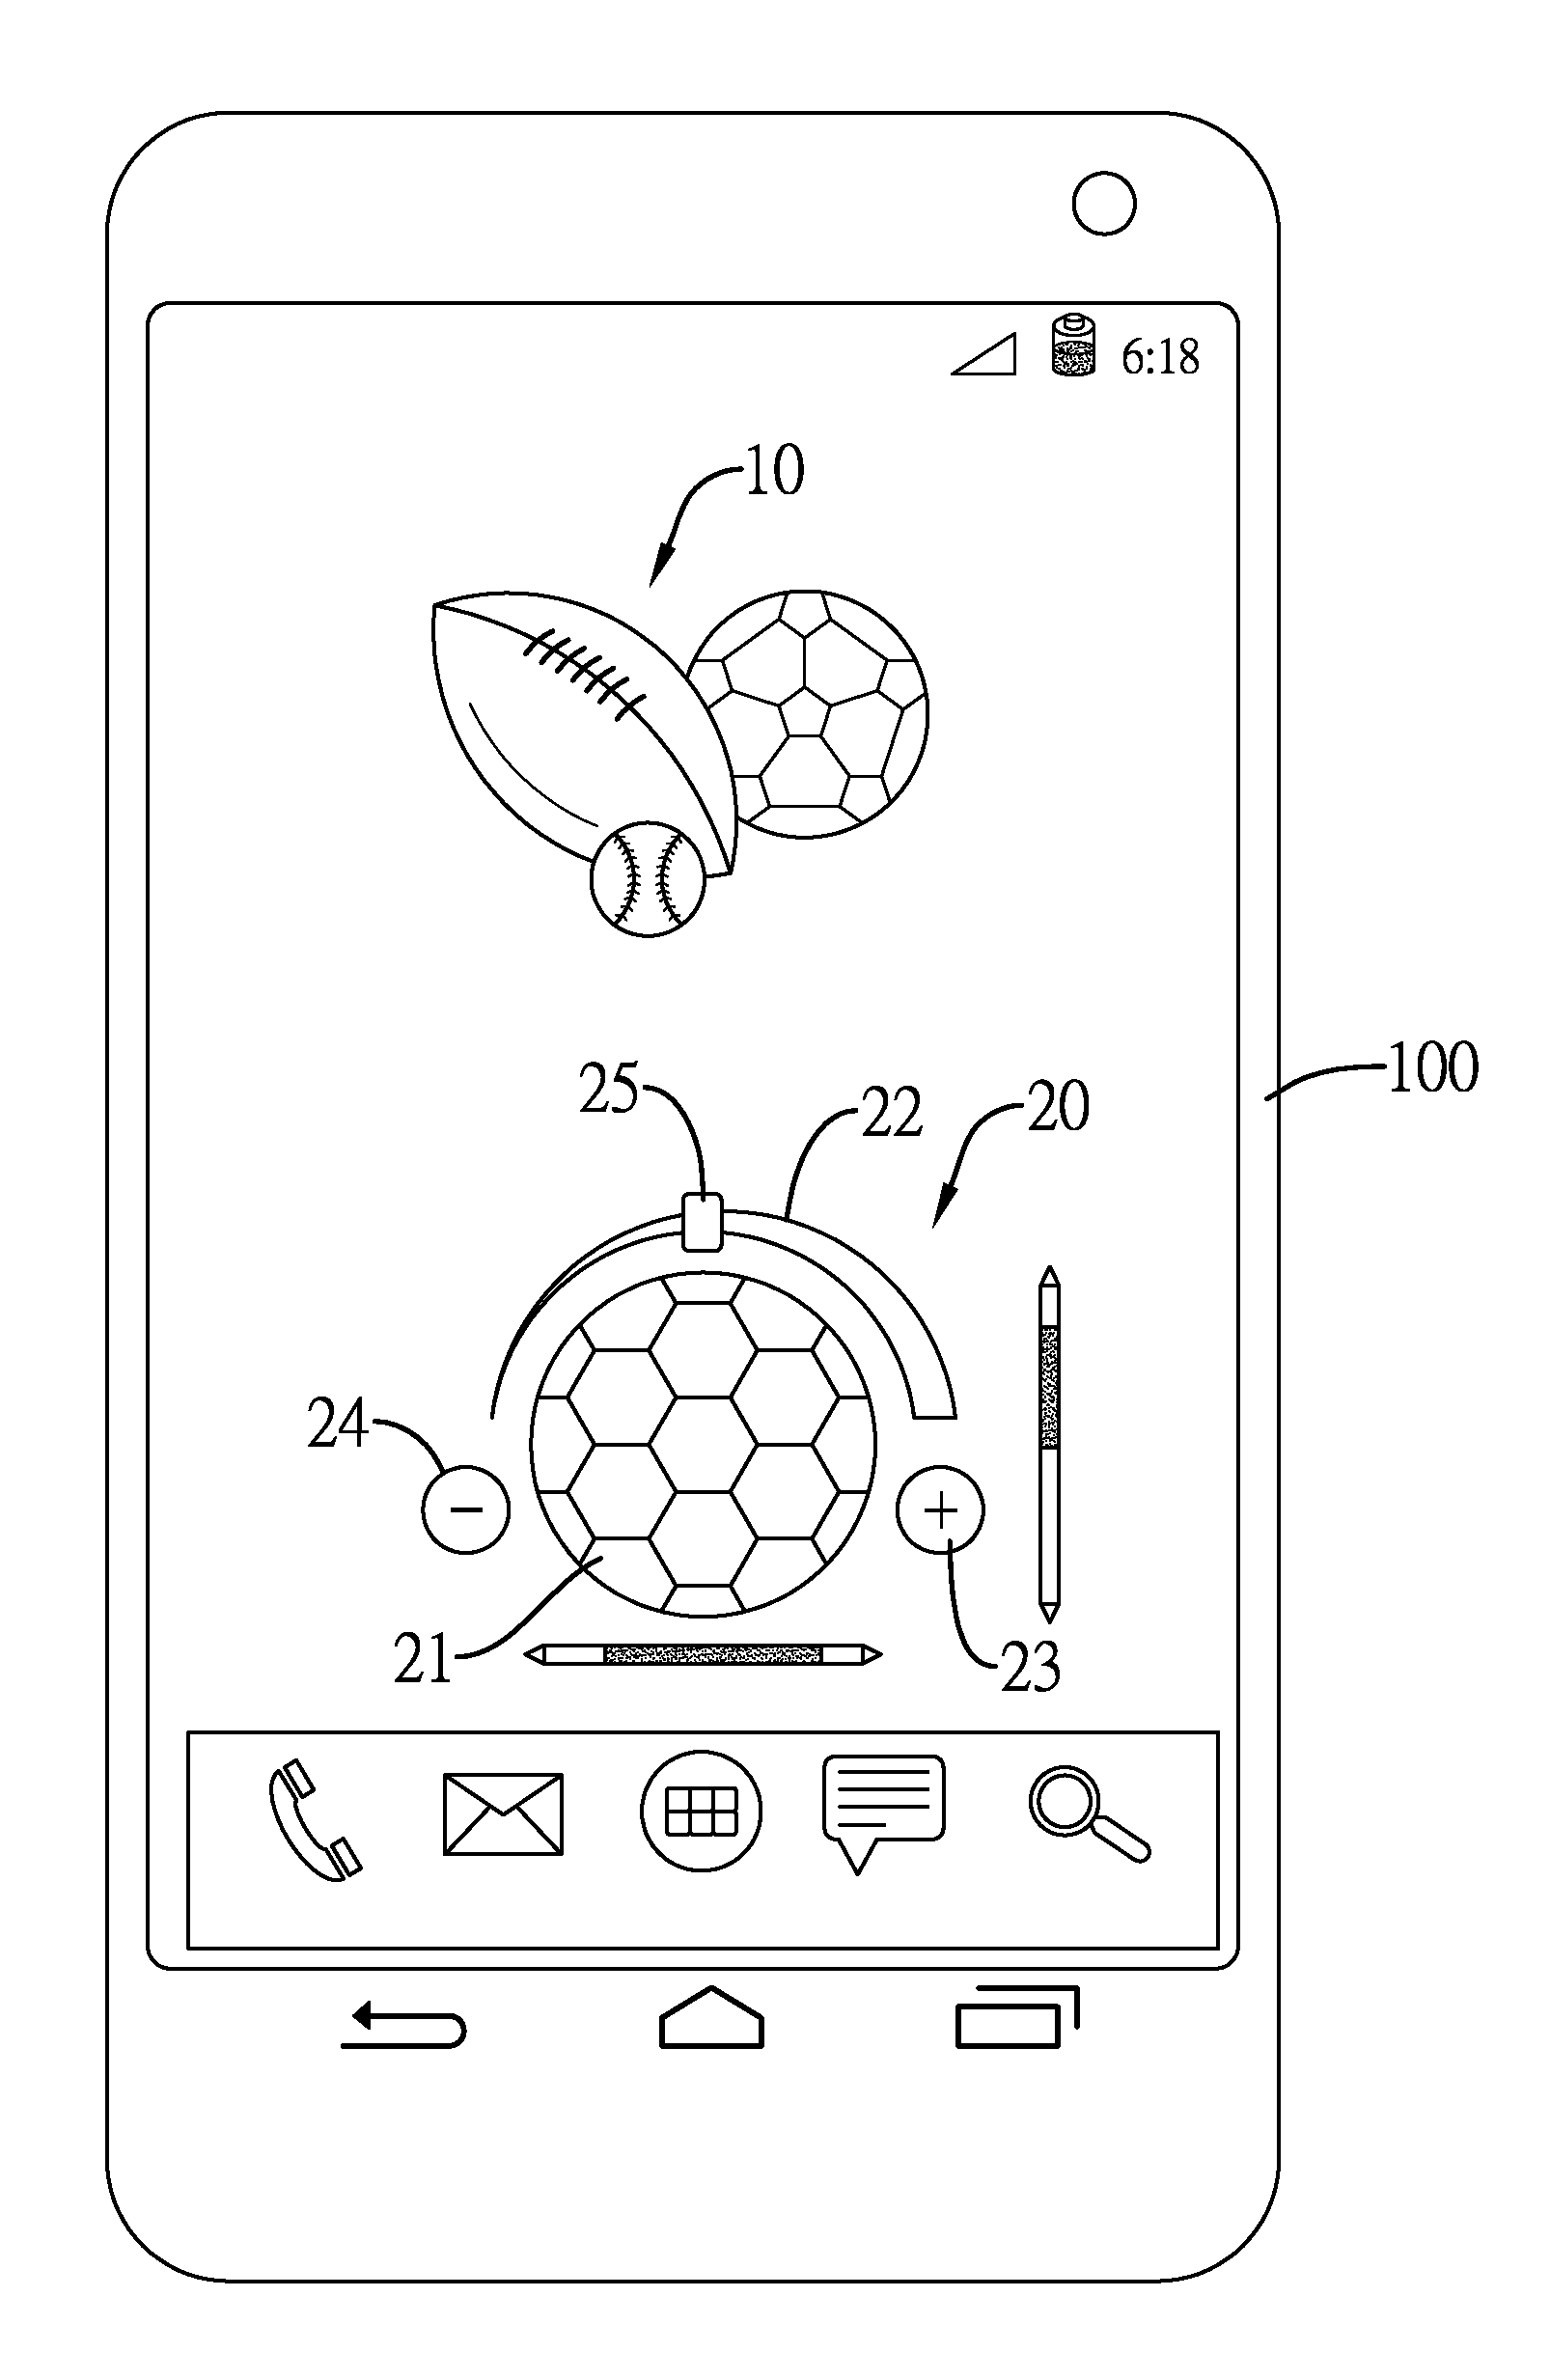 Method for controlling the display of a document shown on a touch device